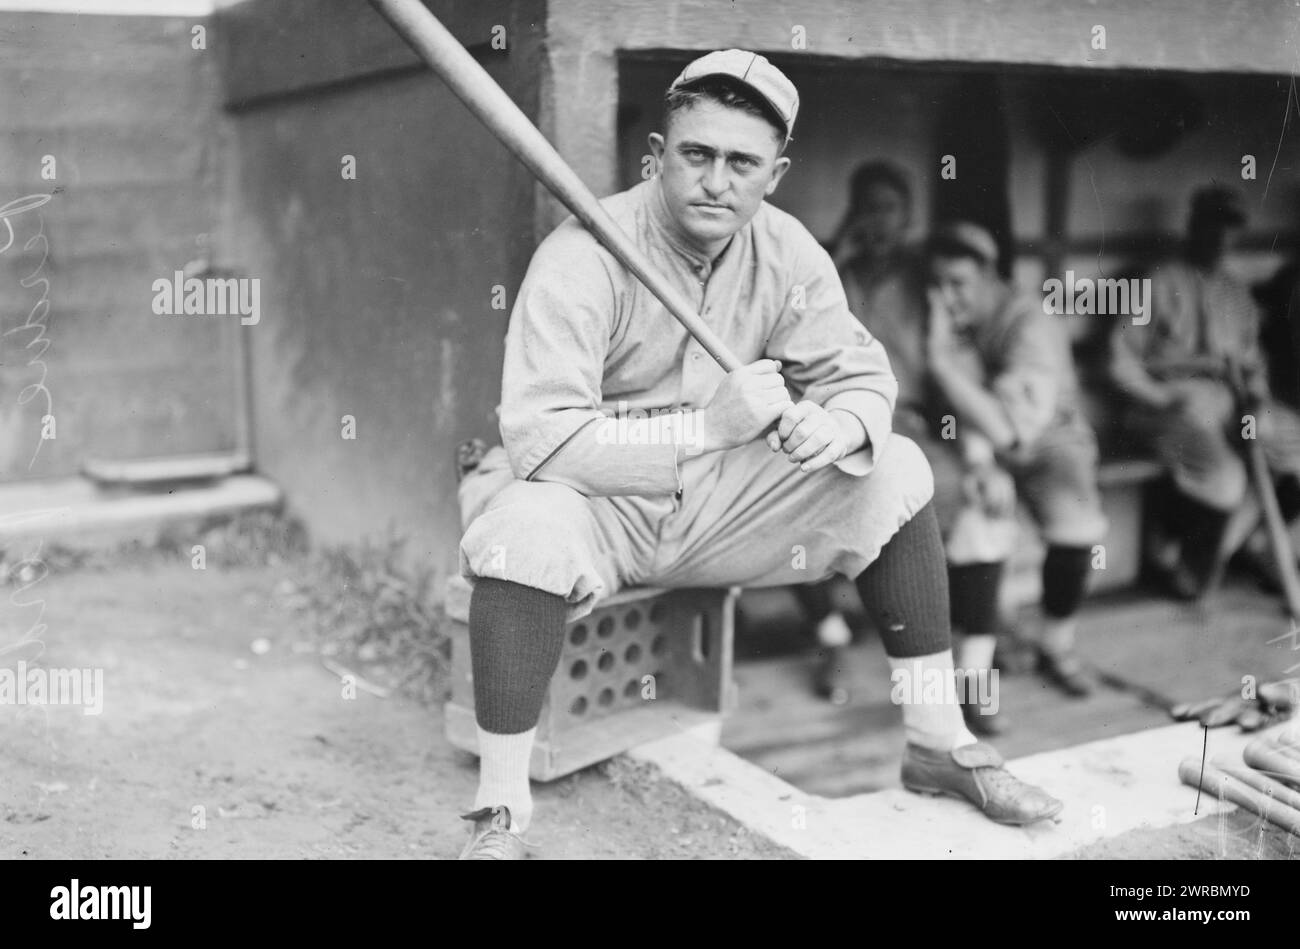 Hub Perdue, St. Louis NL (baseball), Photograph shows baseball player Herbert Rodney Perdue (1882-1968), who was a pitcher in the Major Leagues from 1911-1915., 1914 Aug. 22 (date created or published later by Bain., Glass negatives, 1 negative: glass Stock Photo